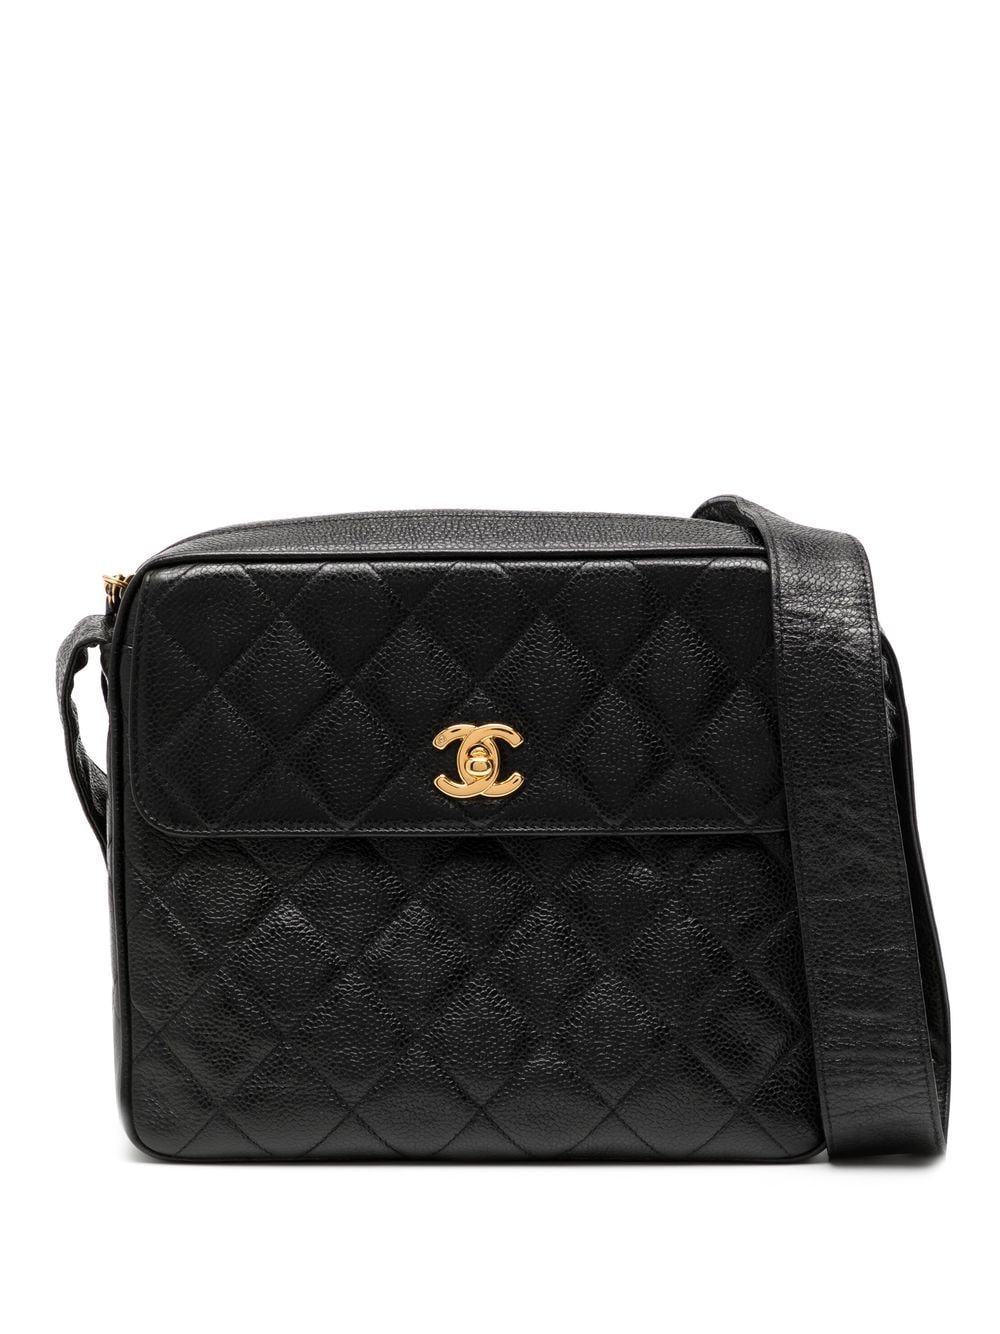 Image 1 of CHANEL Pre-Owned 1995 Schultertasche mit rautenförmiger Steppung